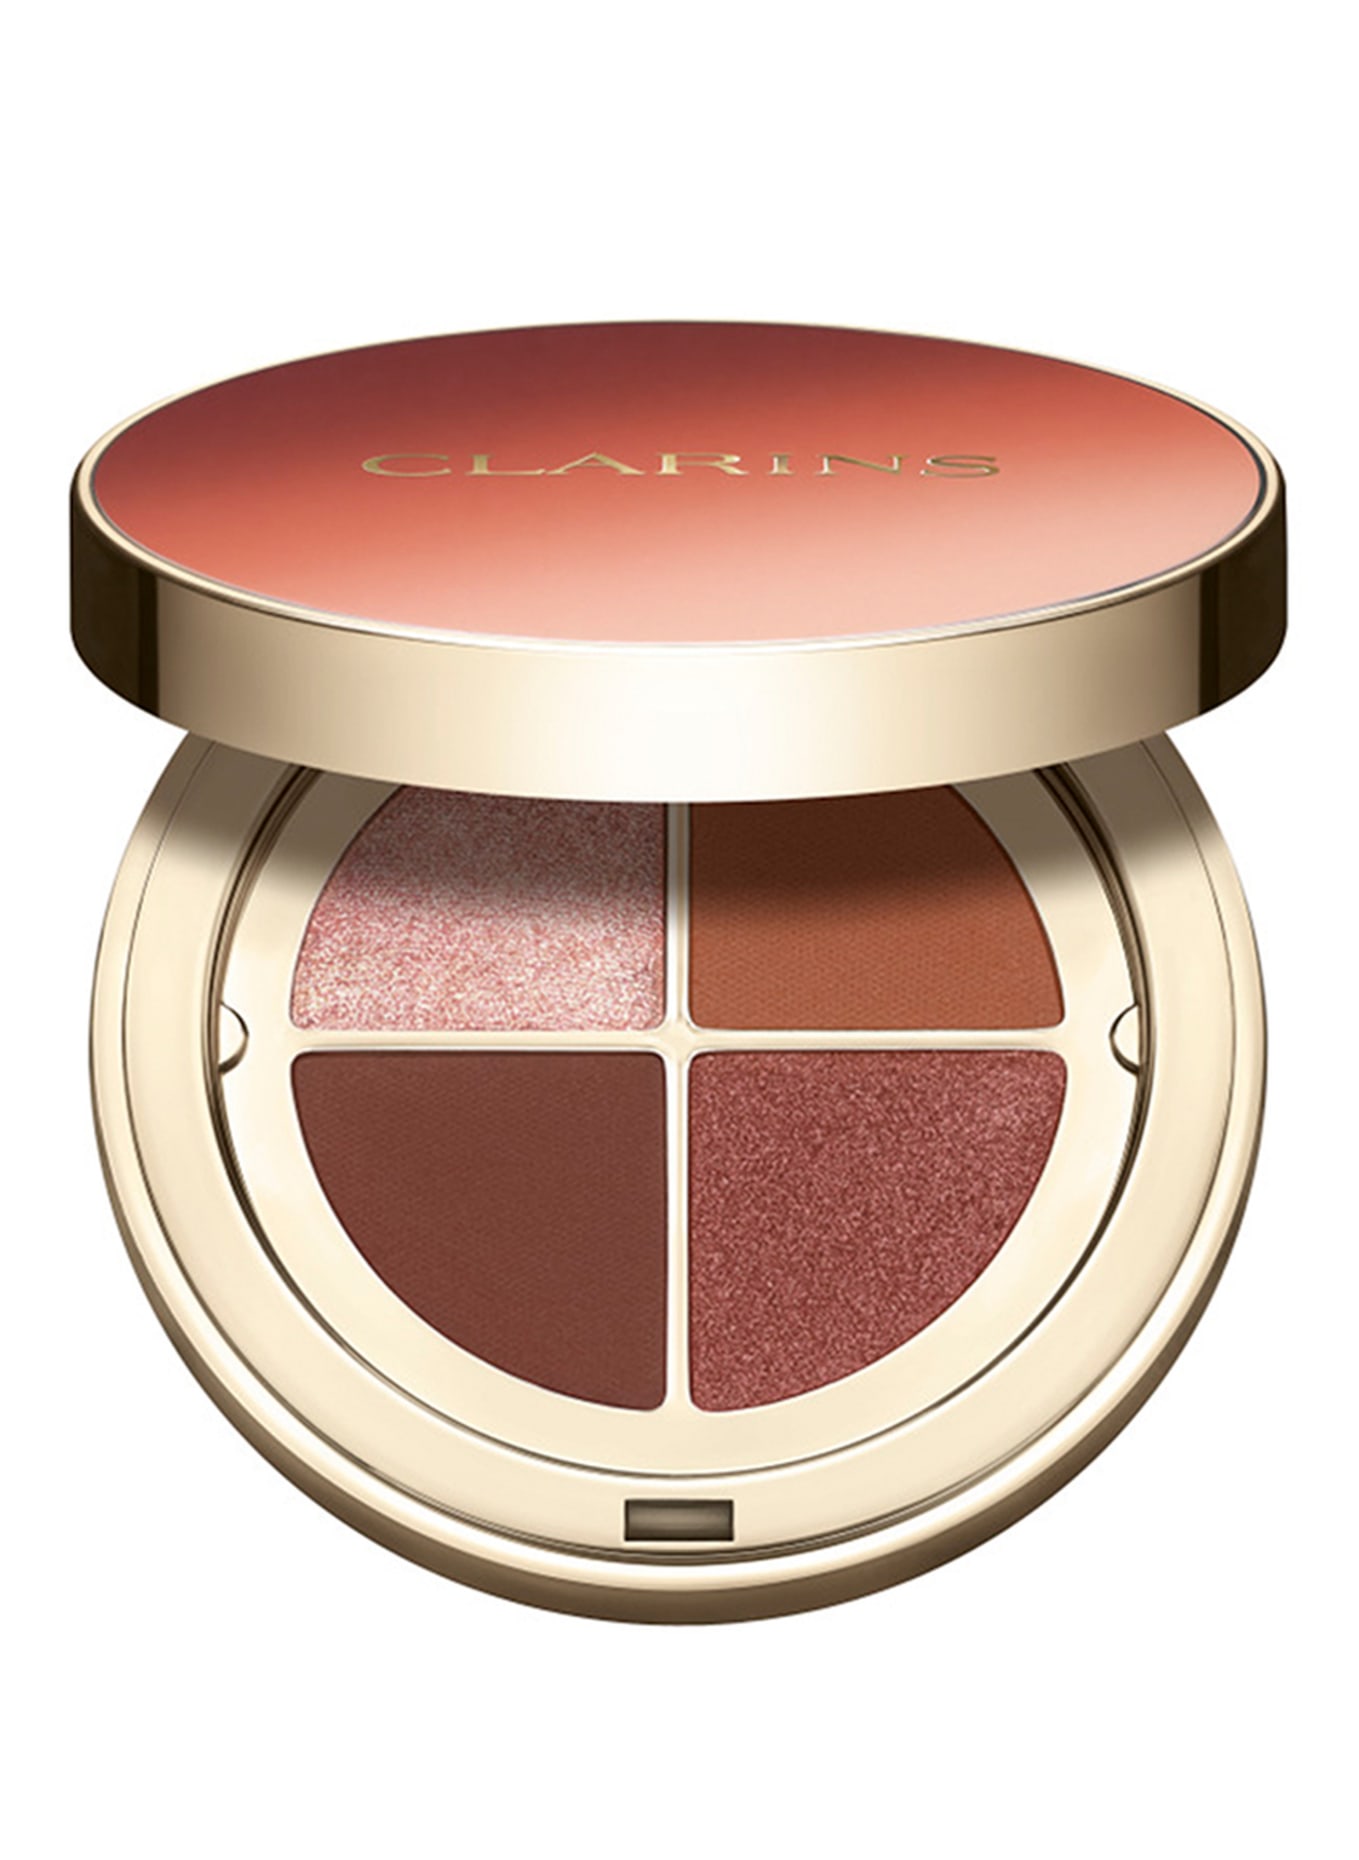 CLARINS OMBRE 4 COULEURS, Farbe: 03 FLAME GRADATION (Bild 1)